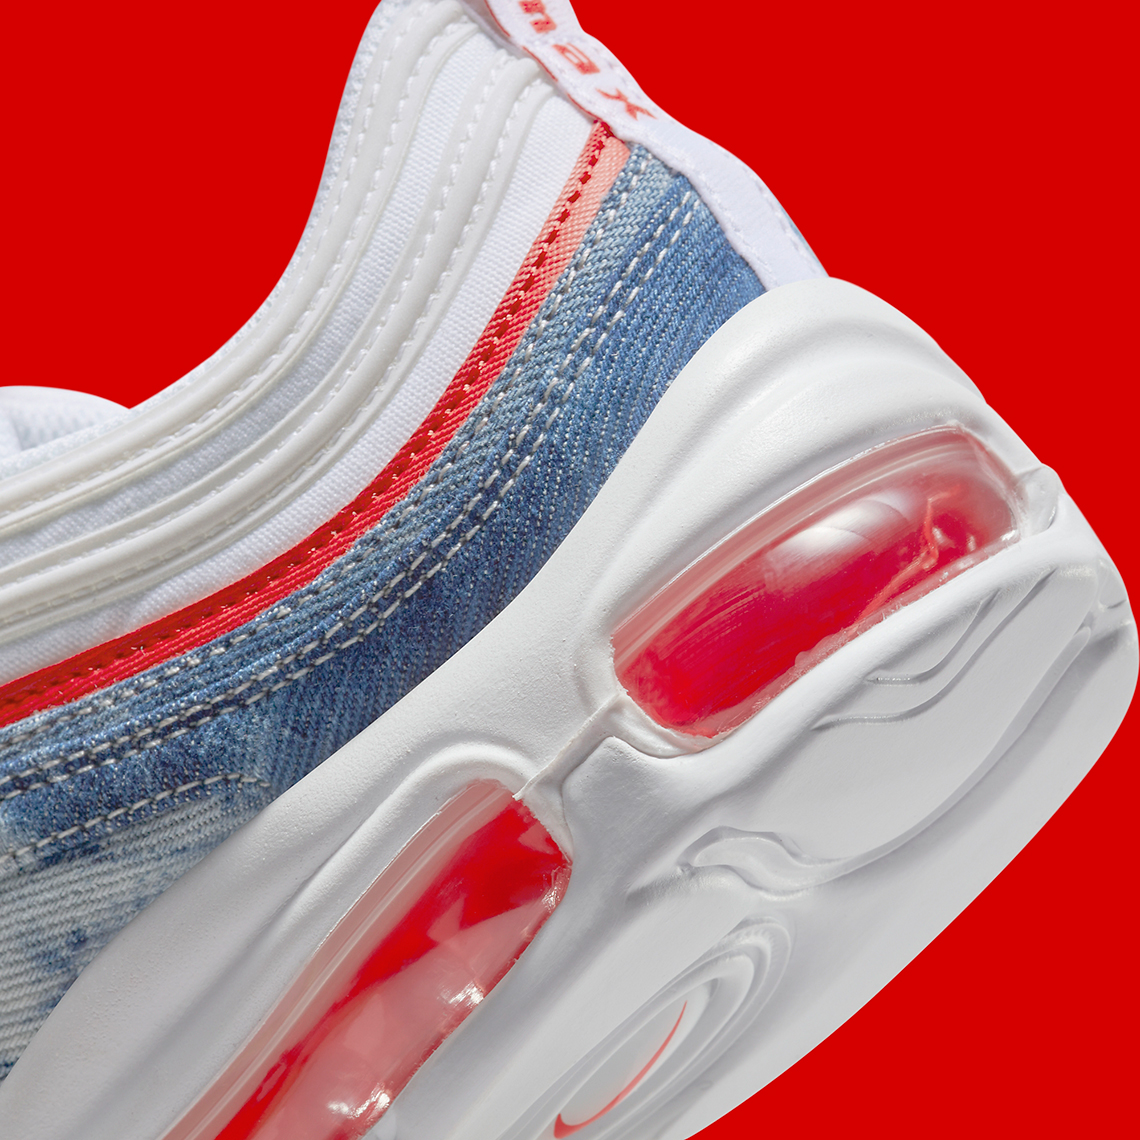 Nike Air Max 97 Washed Denim Release Date 3